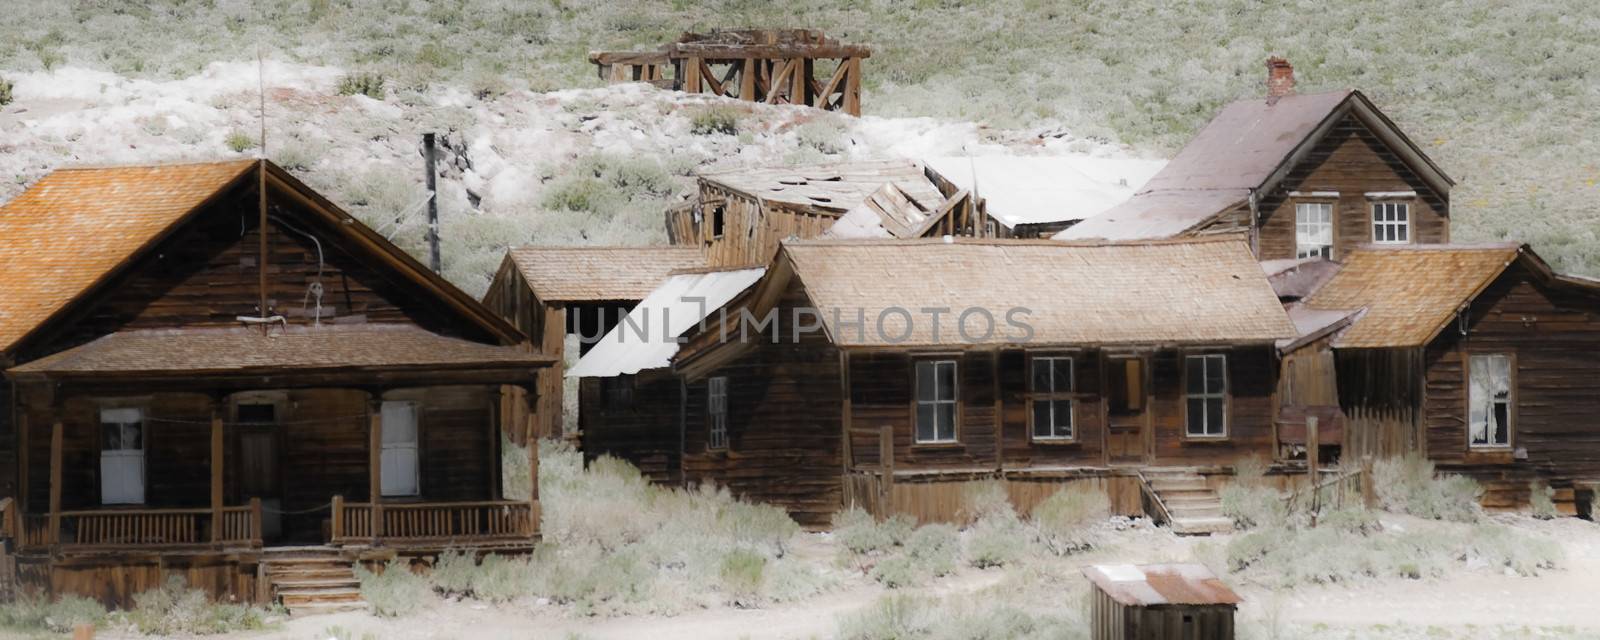 Houses in the Bodie State Historic Park, a genuine California gold-mining ghost town.